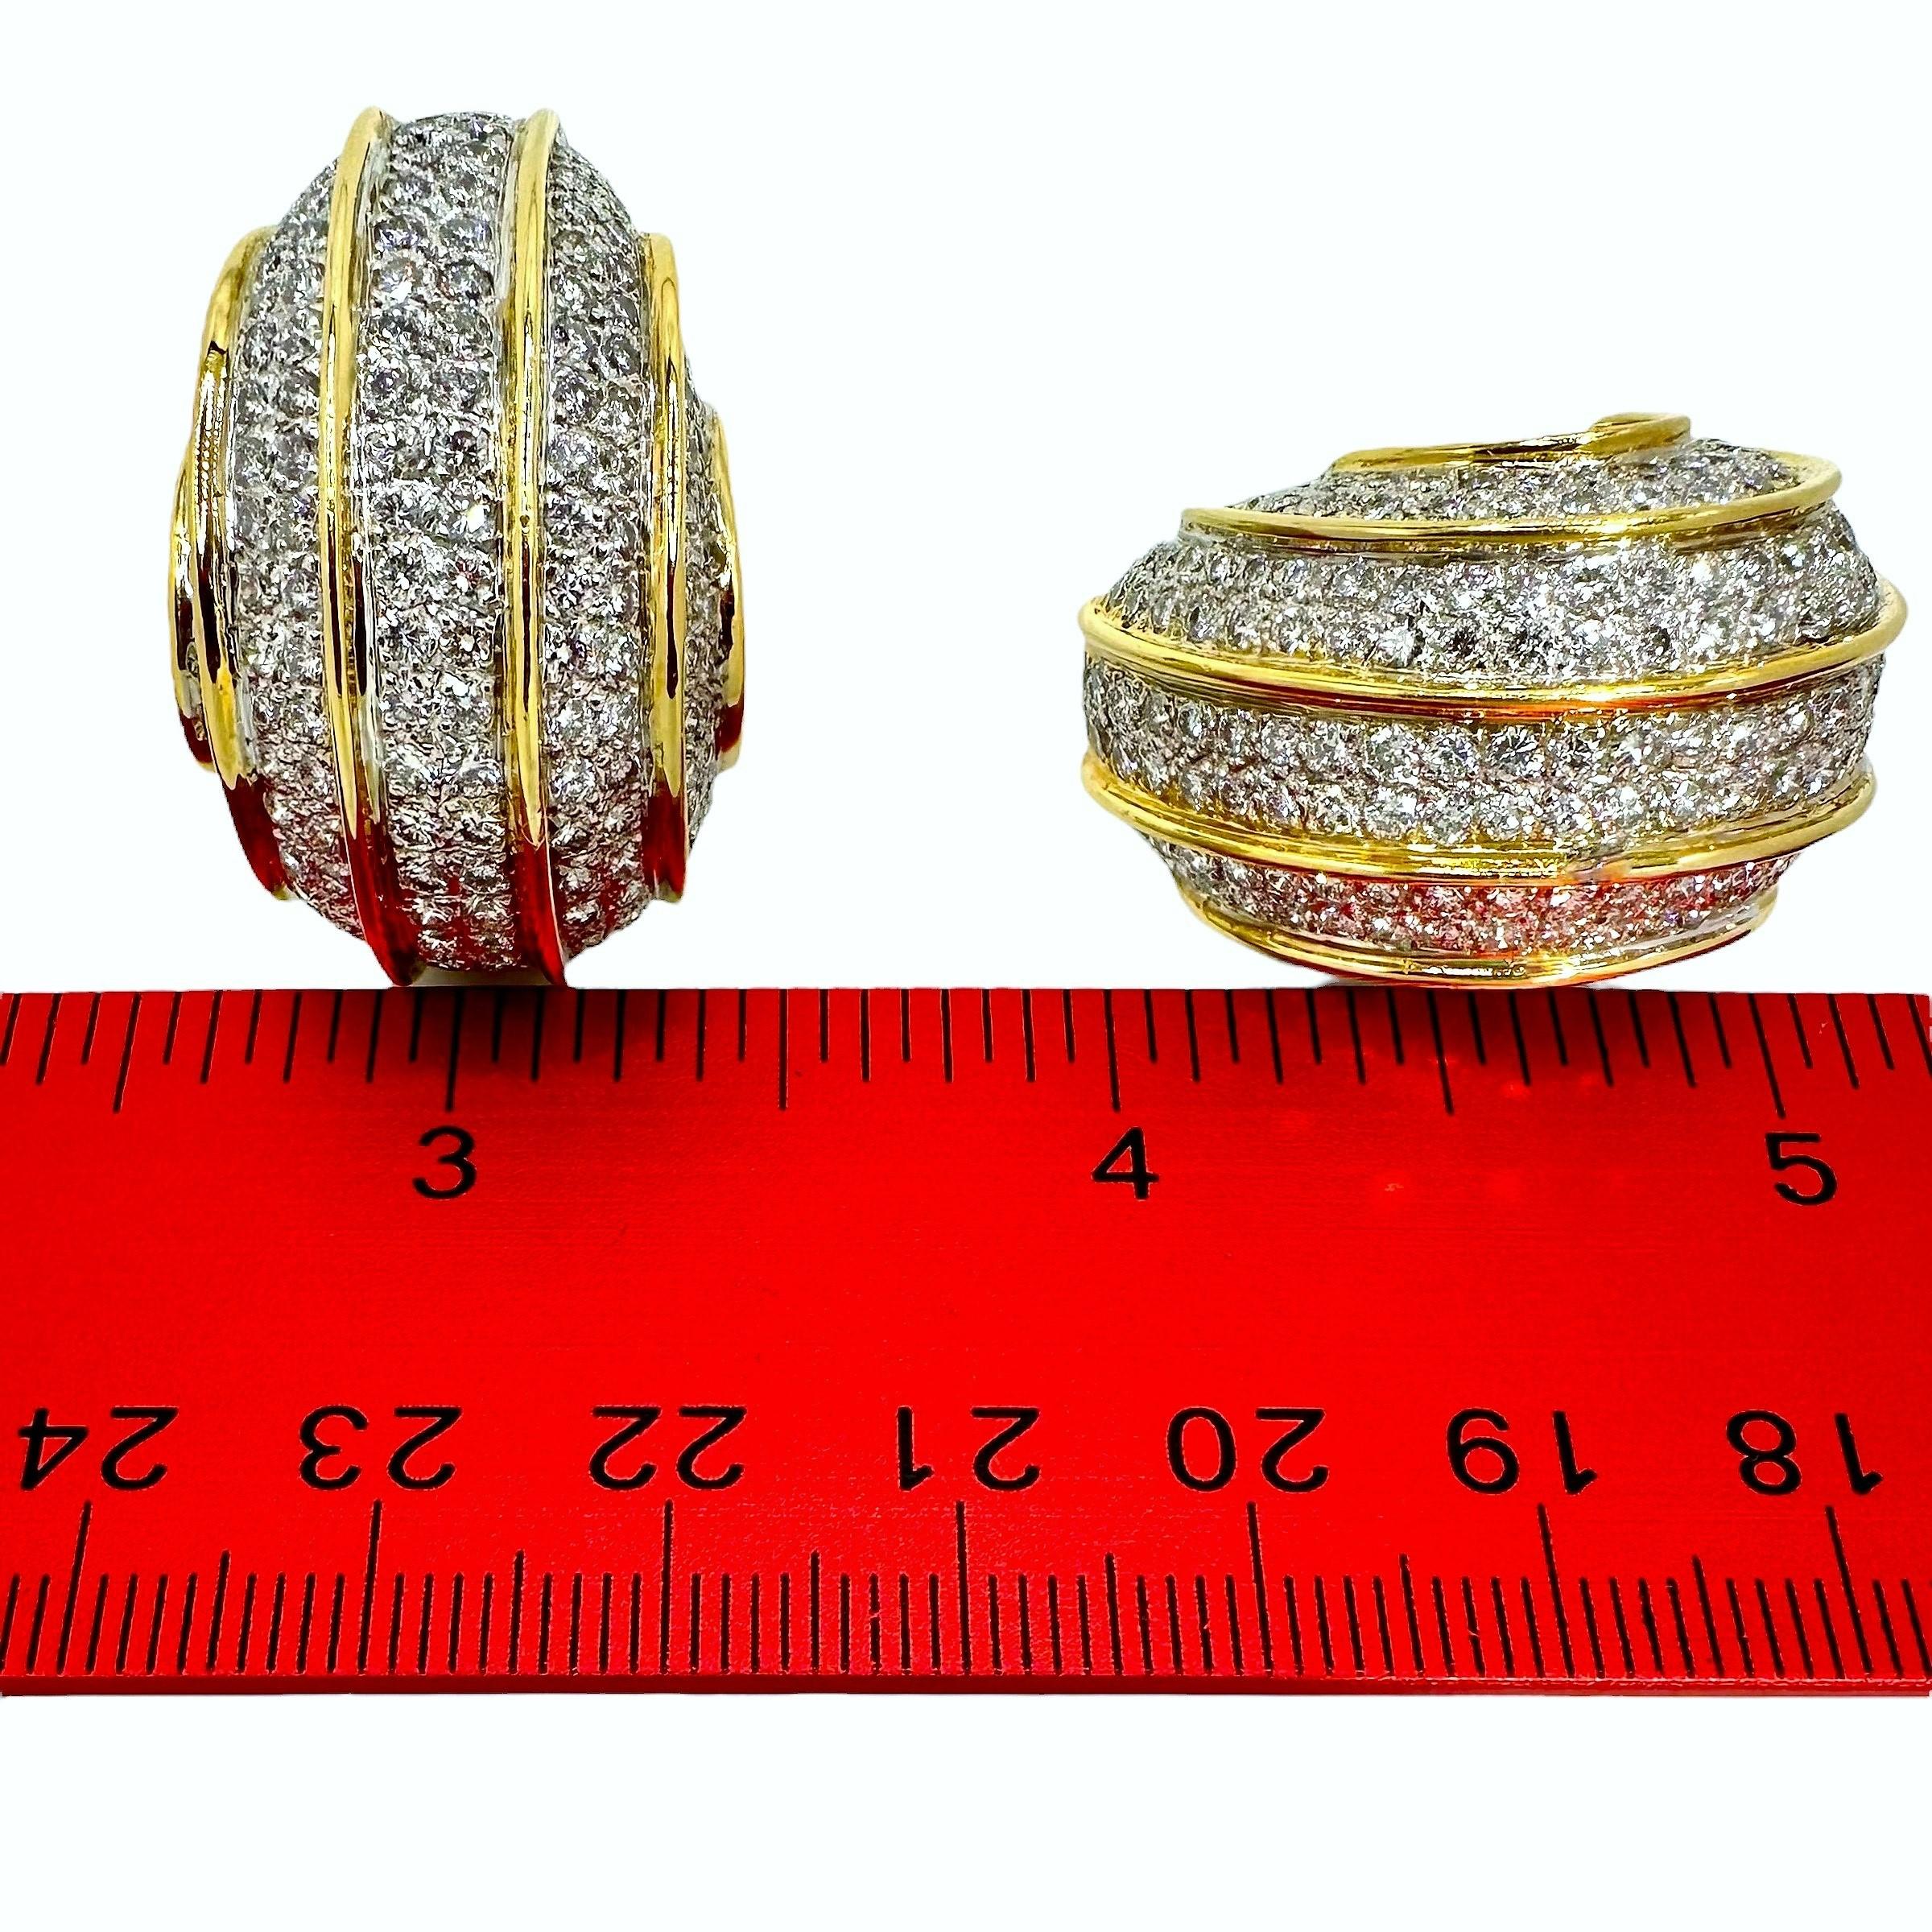 18K White & Yellow Gold Cocktail Earrings with 10Ct Total Approx. Diamond Weight For Sale 1